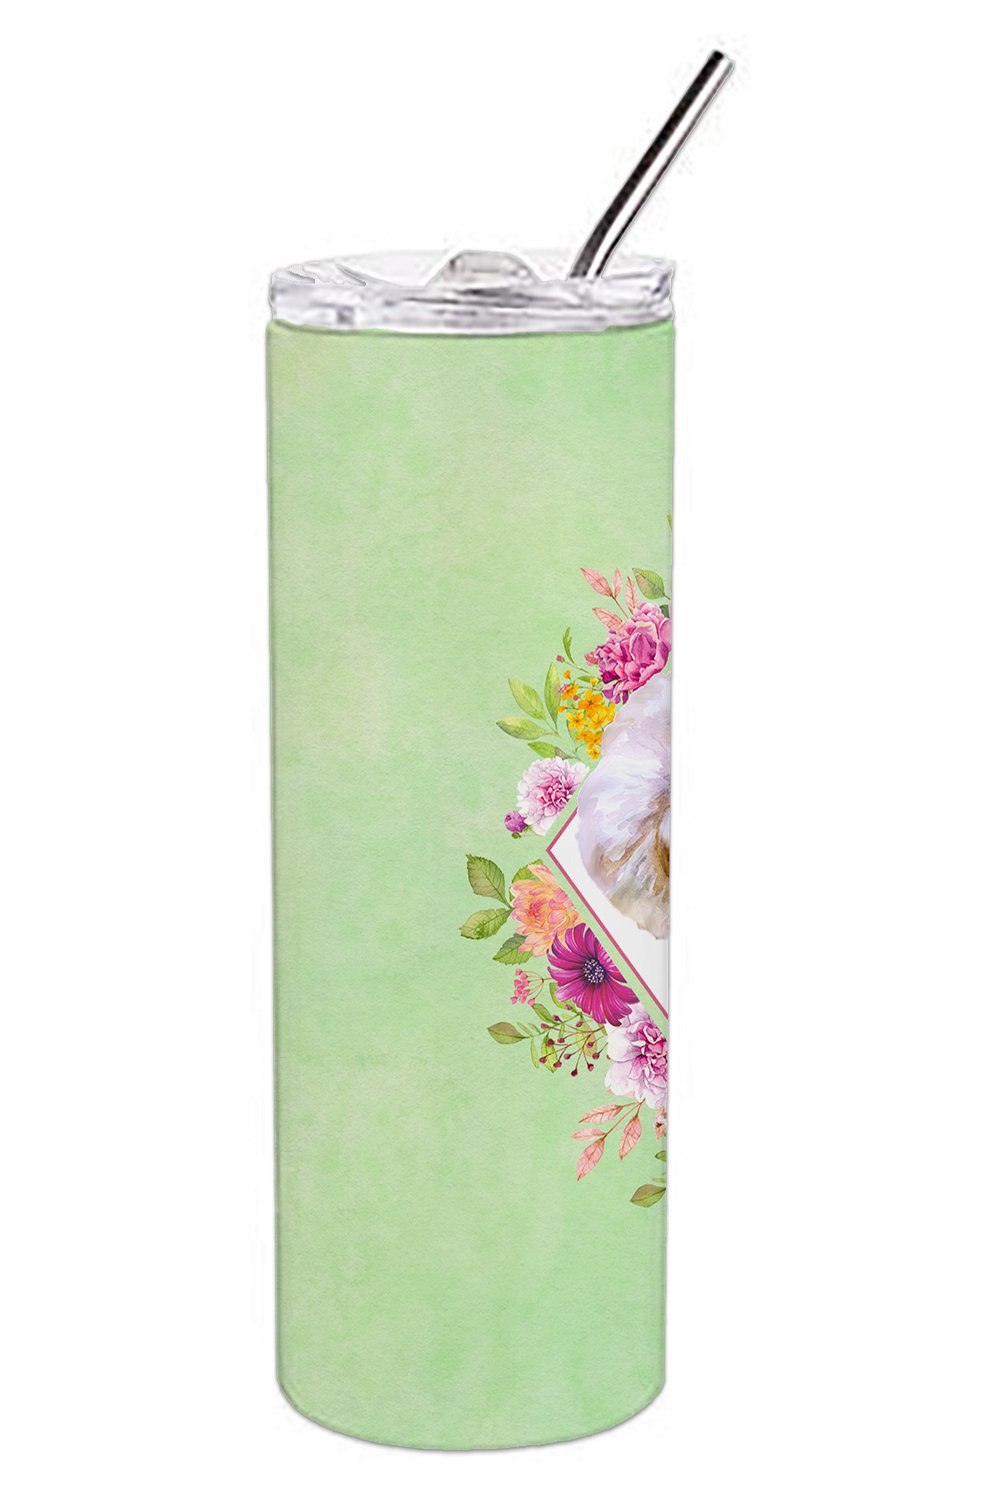 Bichon Frisé #1 Green Flowers Double Walled Stainless Steel 20 oz Skinny Tumbler CK4279TBL20 by Caroline's Treasures